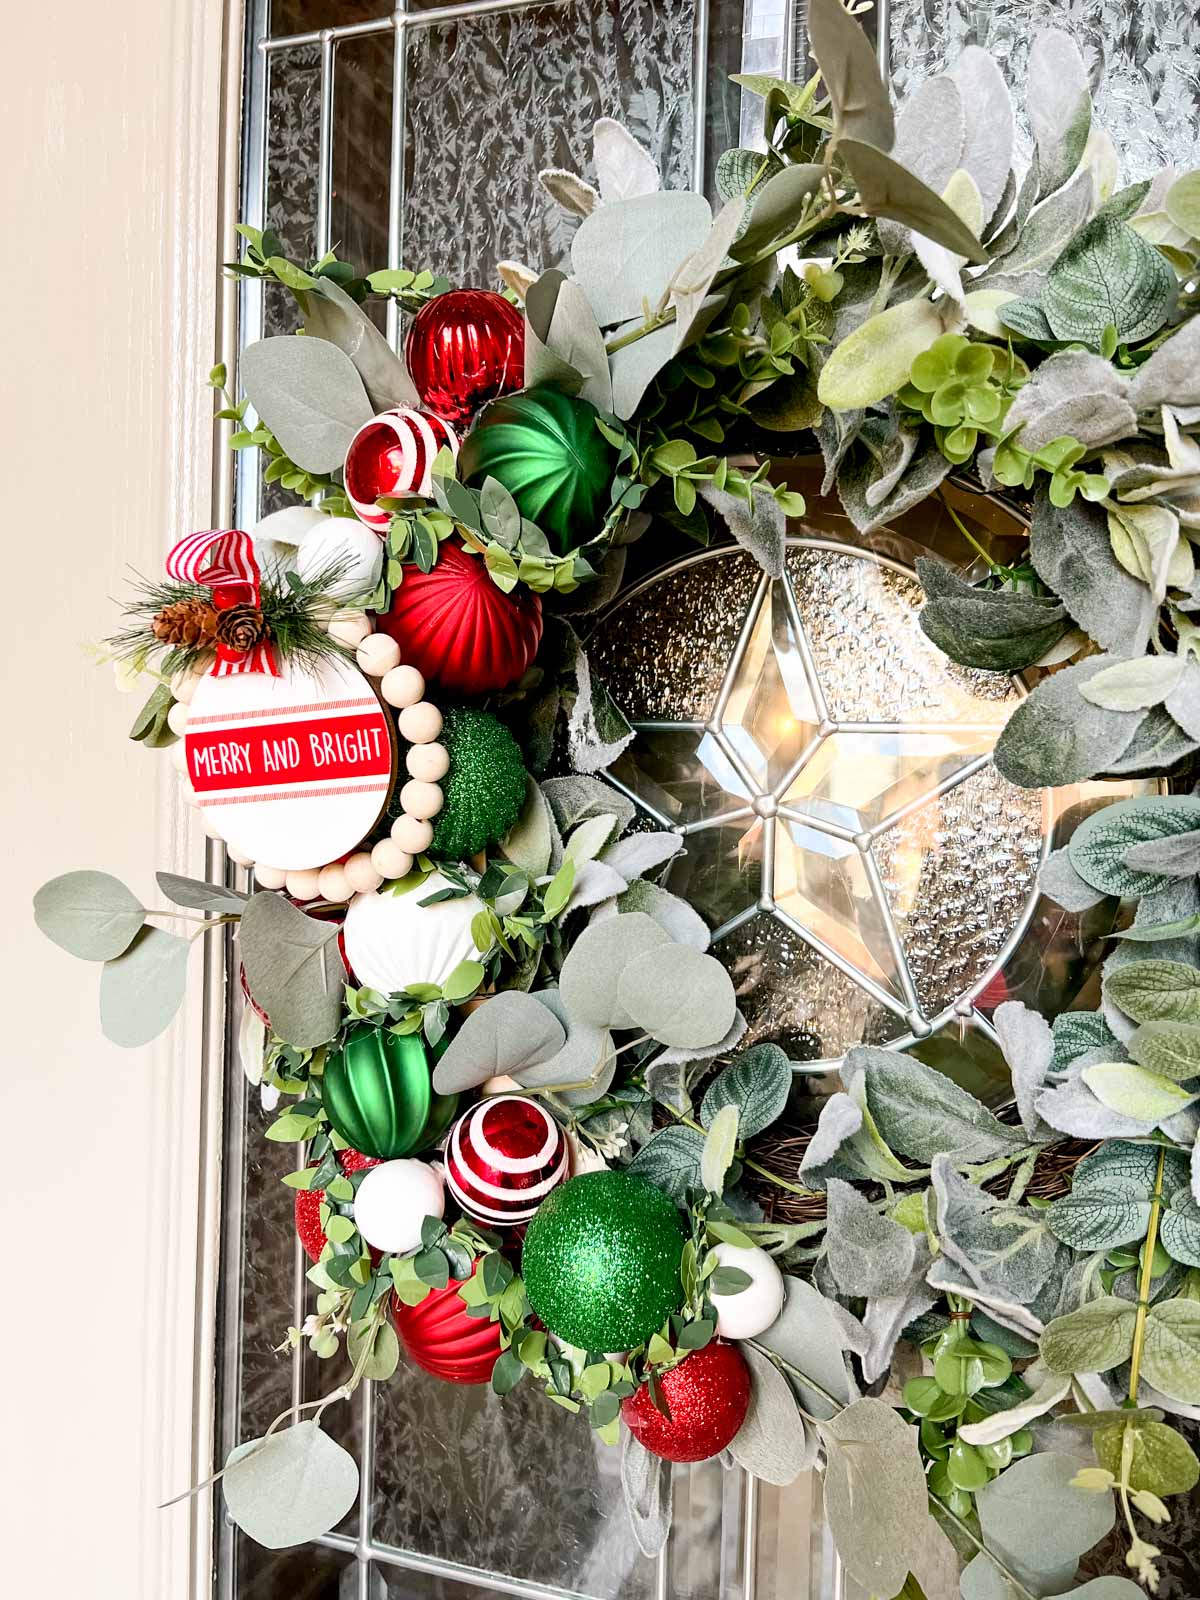 A basic 22 inch lamb's ear wreath from Walmart that has added decorations of red, green and white Christmas ornaments of varying size. 